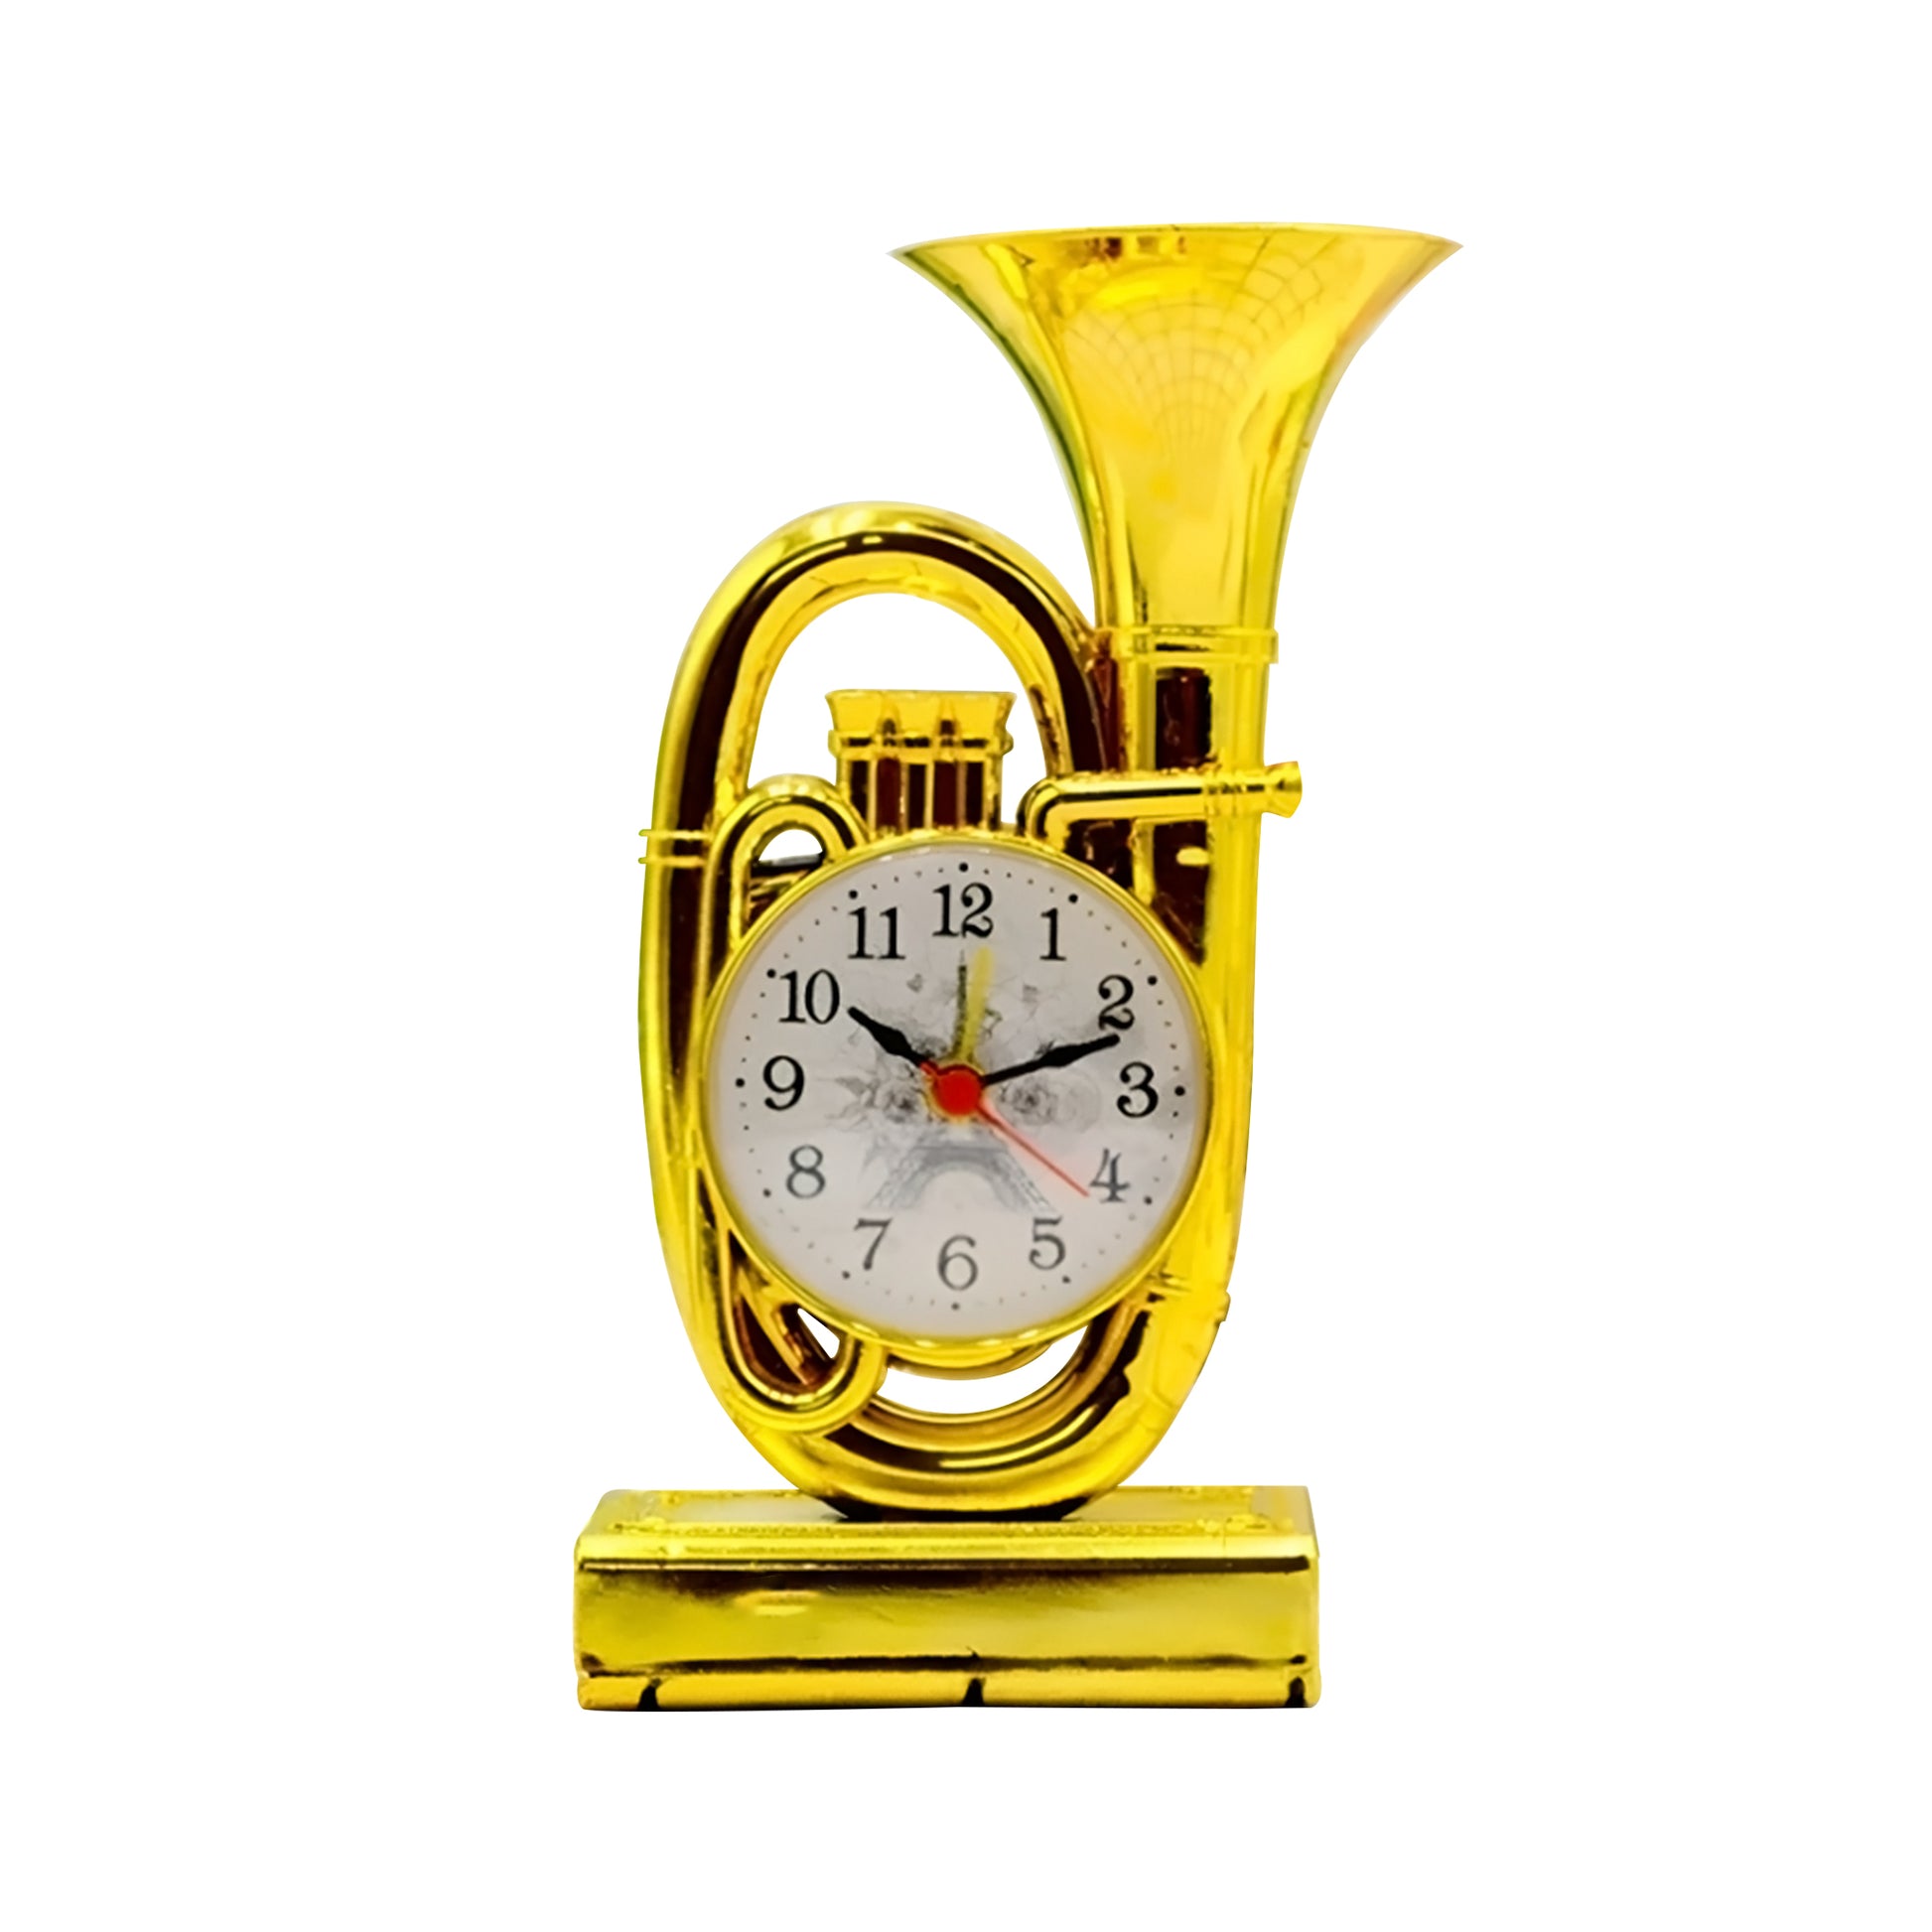 Table Analog Trumpet Yellow Brass Style Alarm Clock For Home Decoration 